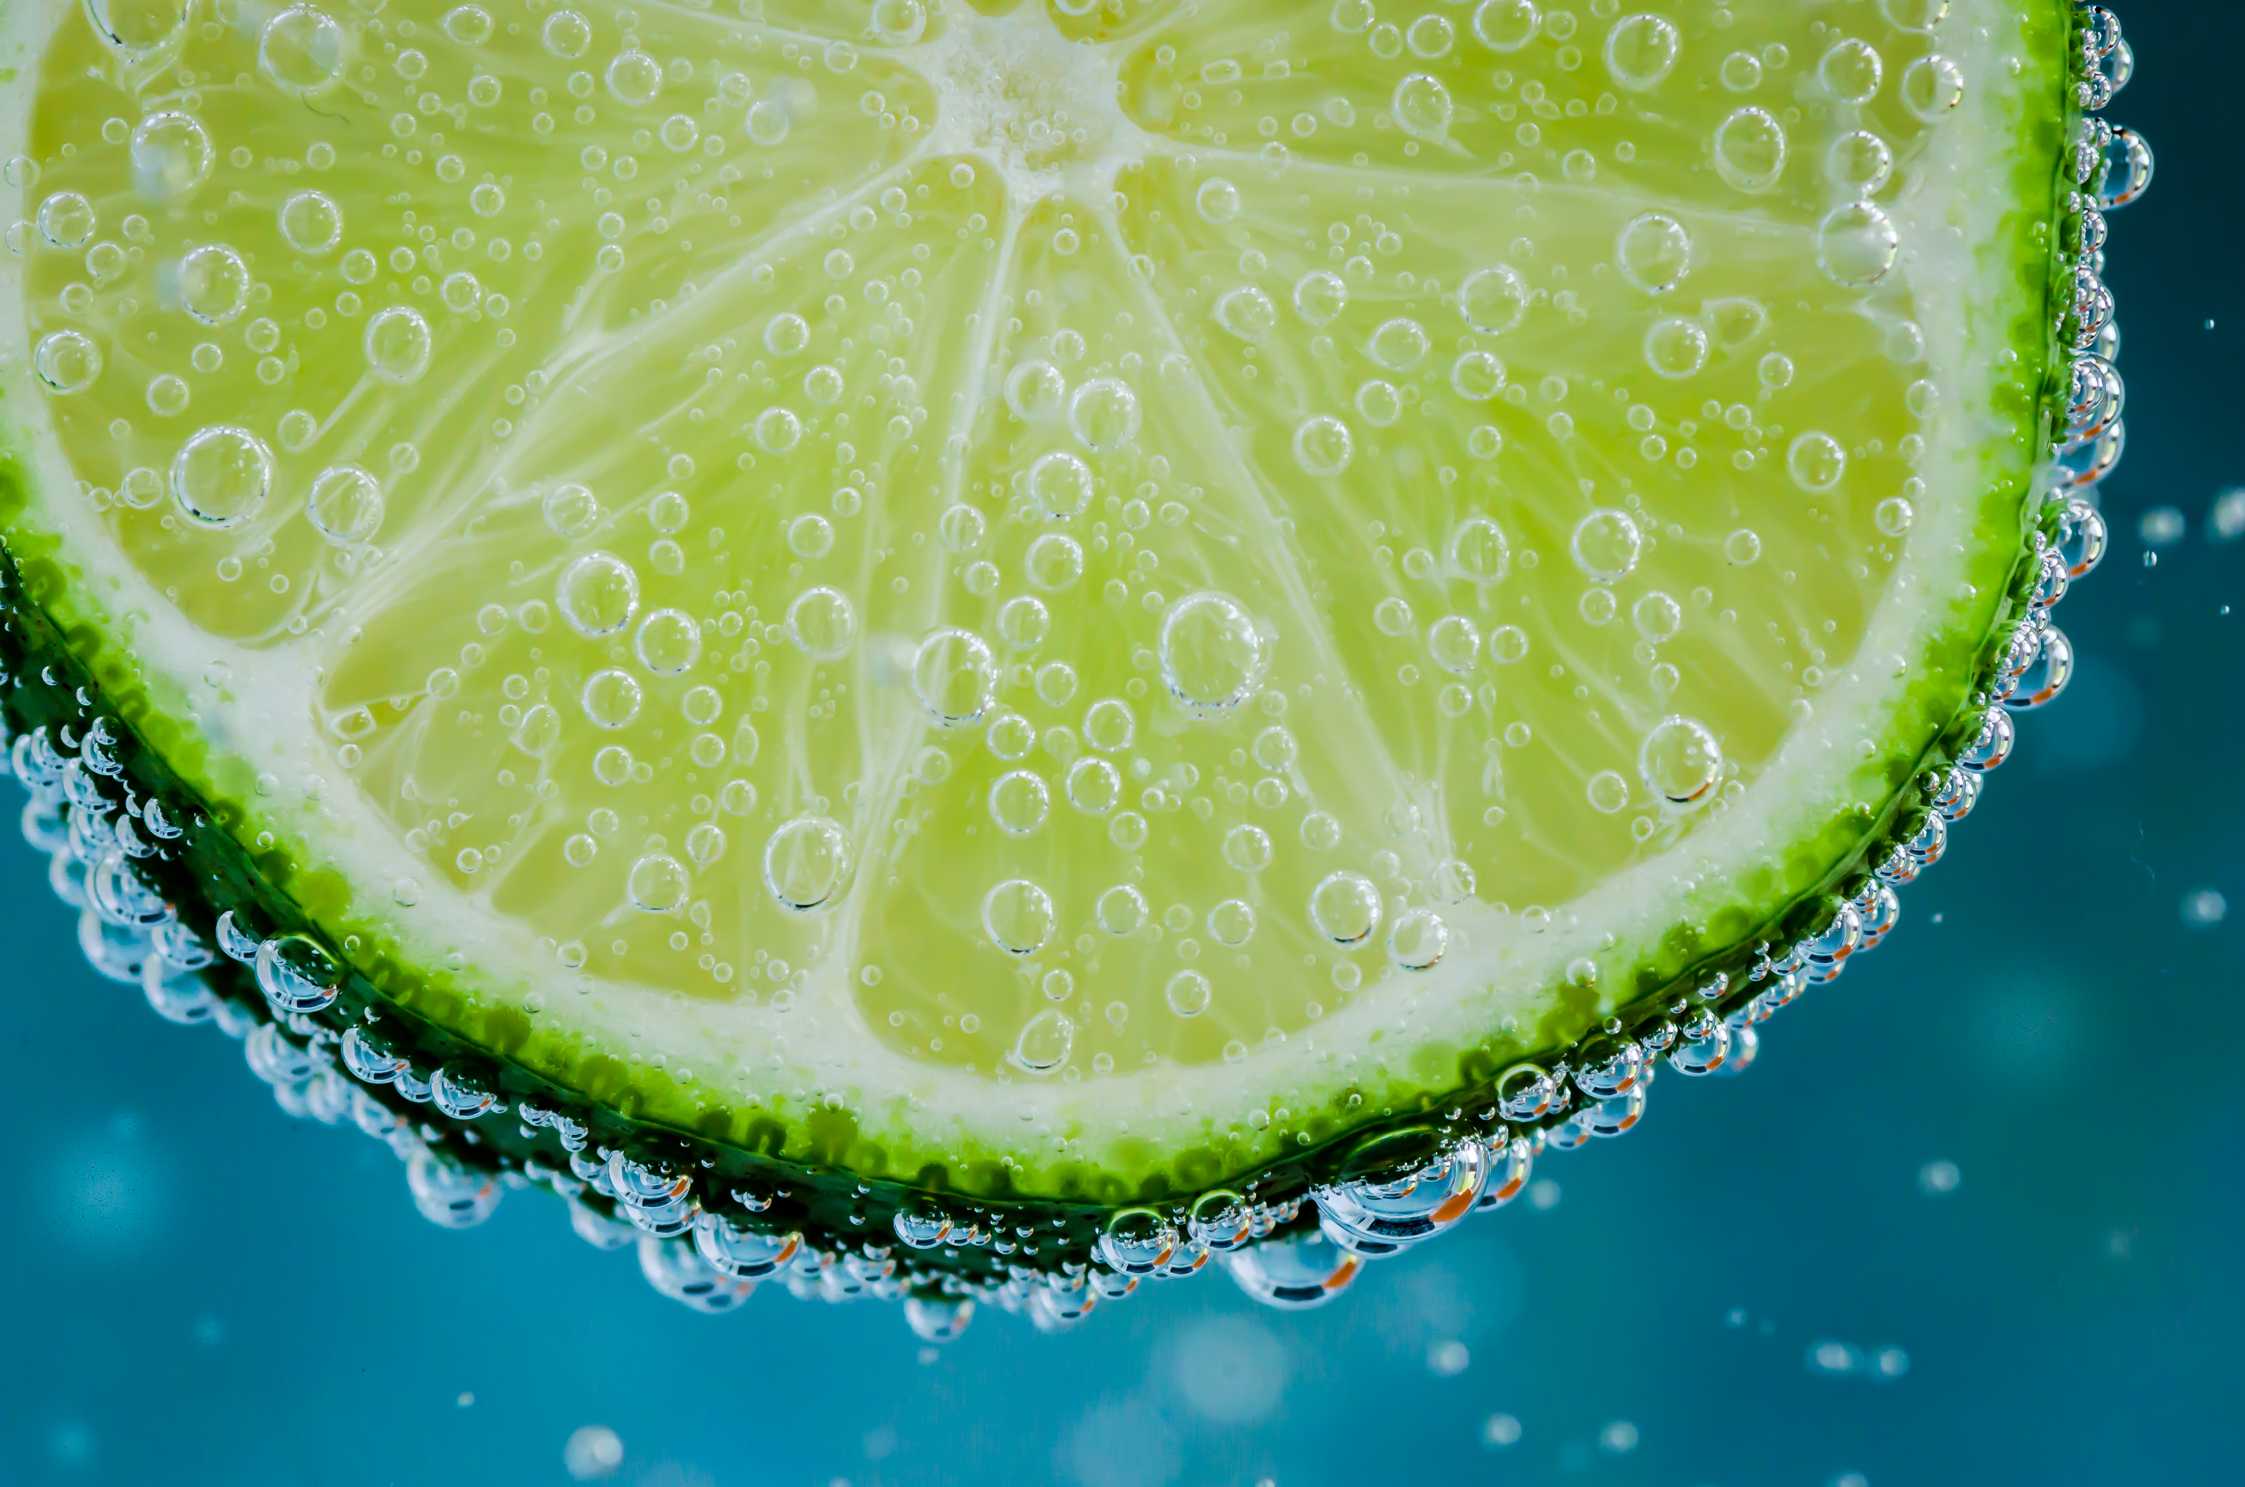 microsoft, professional faqs: is lime juice good for diabetic?